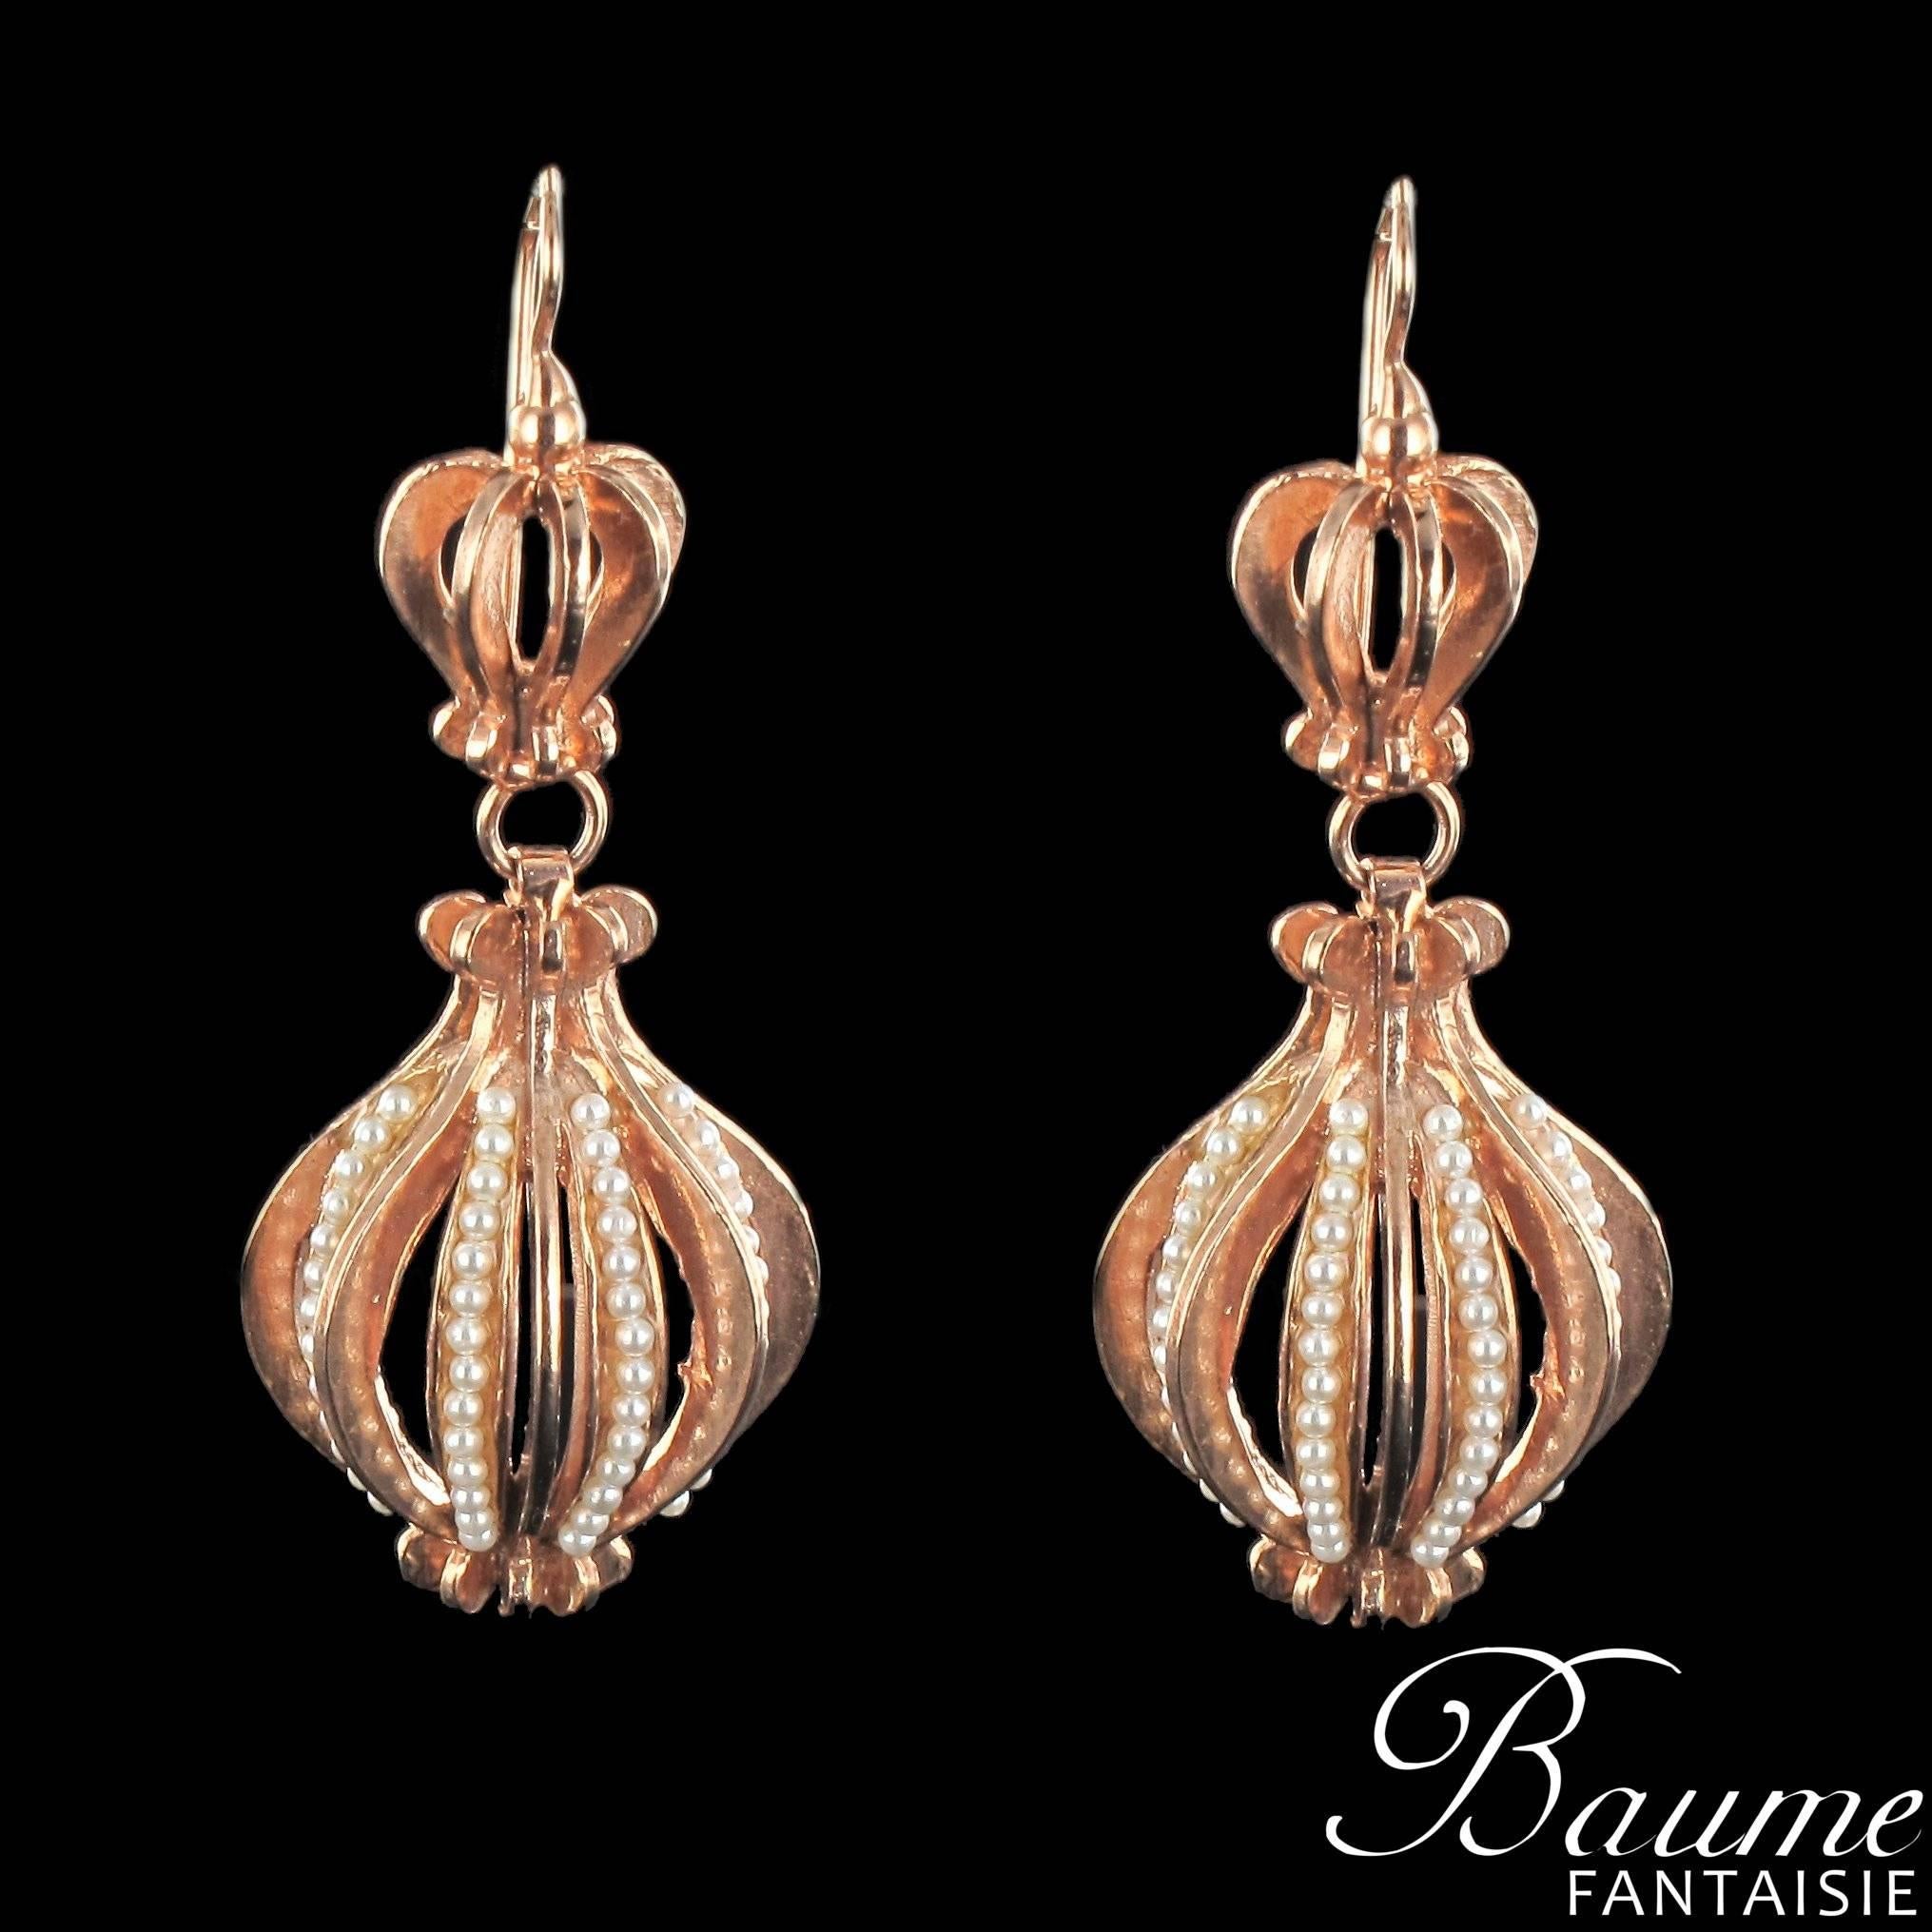 For pierced ears.

Pair of earrings in vermeil, silver and rose gold.

Pendant earrings are set by pearl. The clasps are goosenecks with safety hooks. 

Height: 6 cm, maximum width : 2,2 cm.
Total weight : 19,1 g approximately.

New jewel by Italian